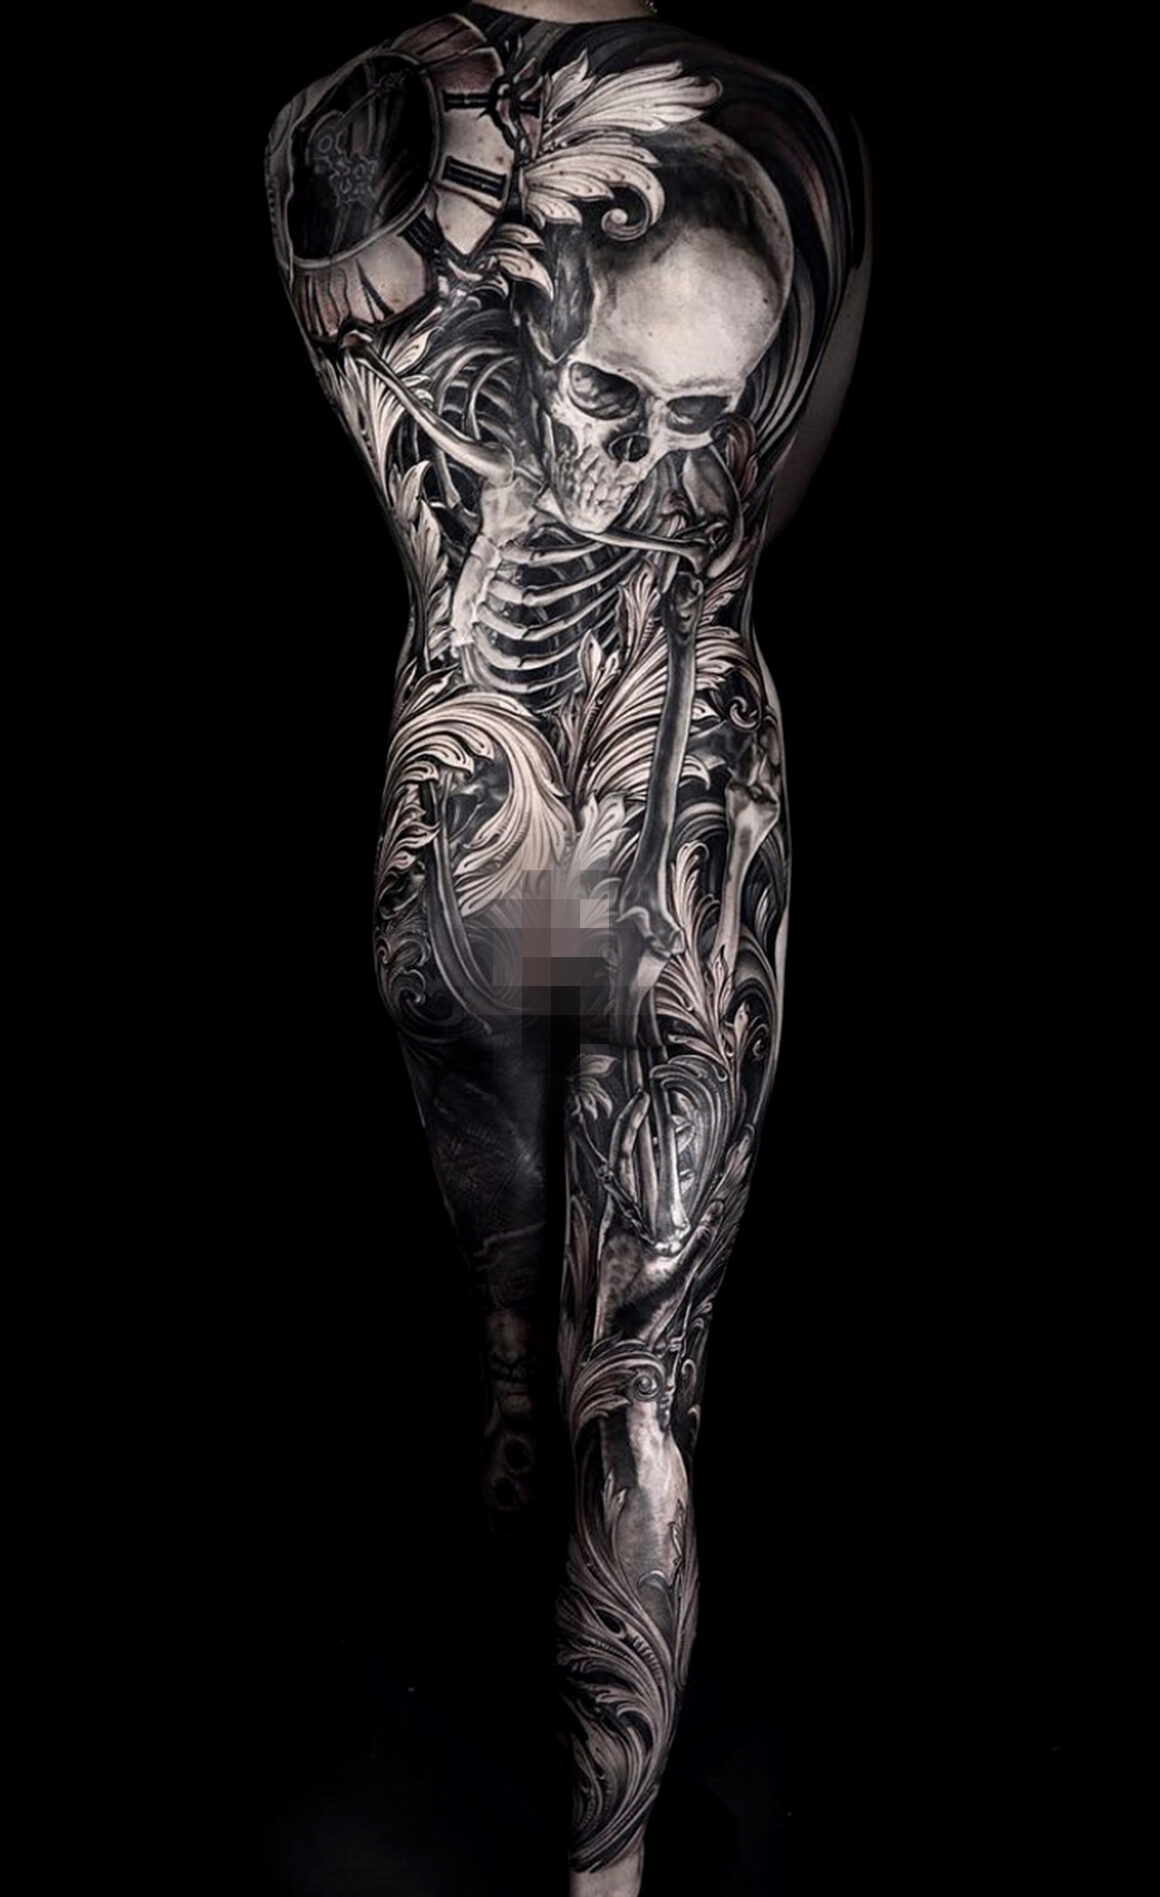 Tattoo by Mads Thill, @madsthill